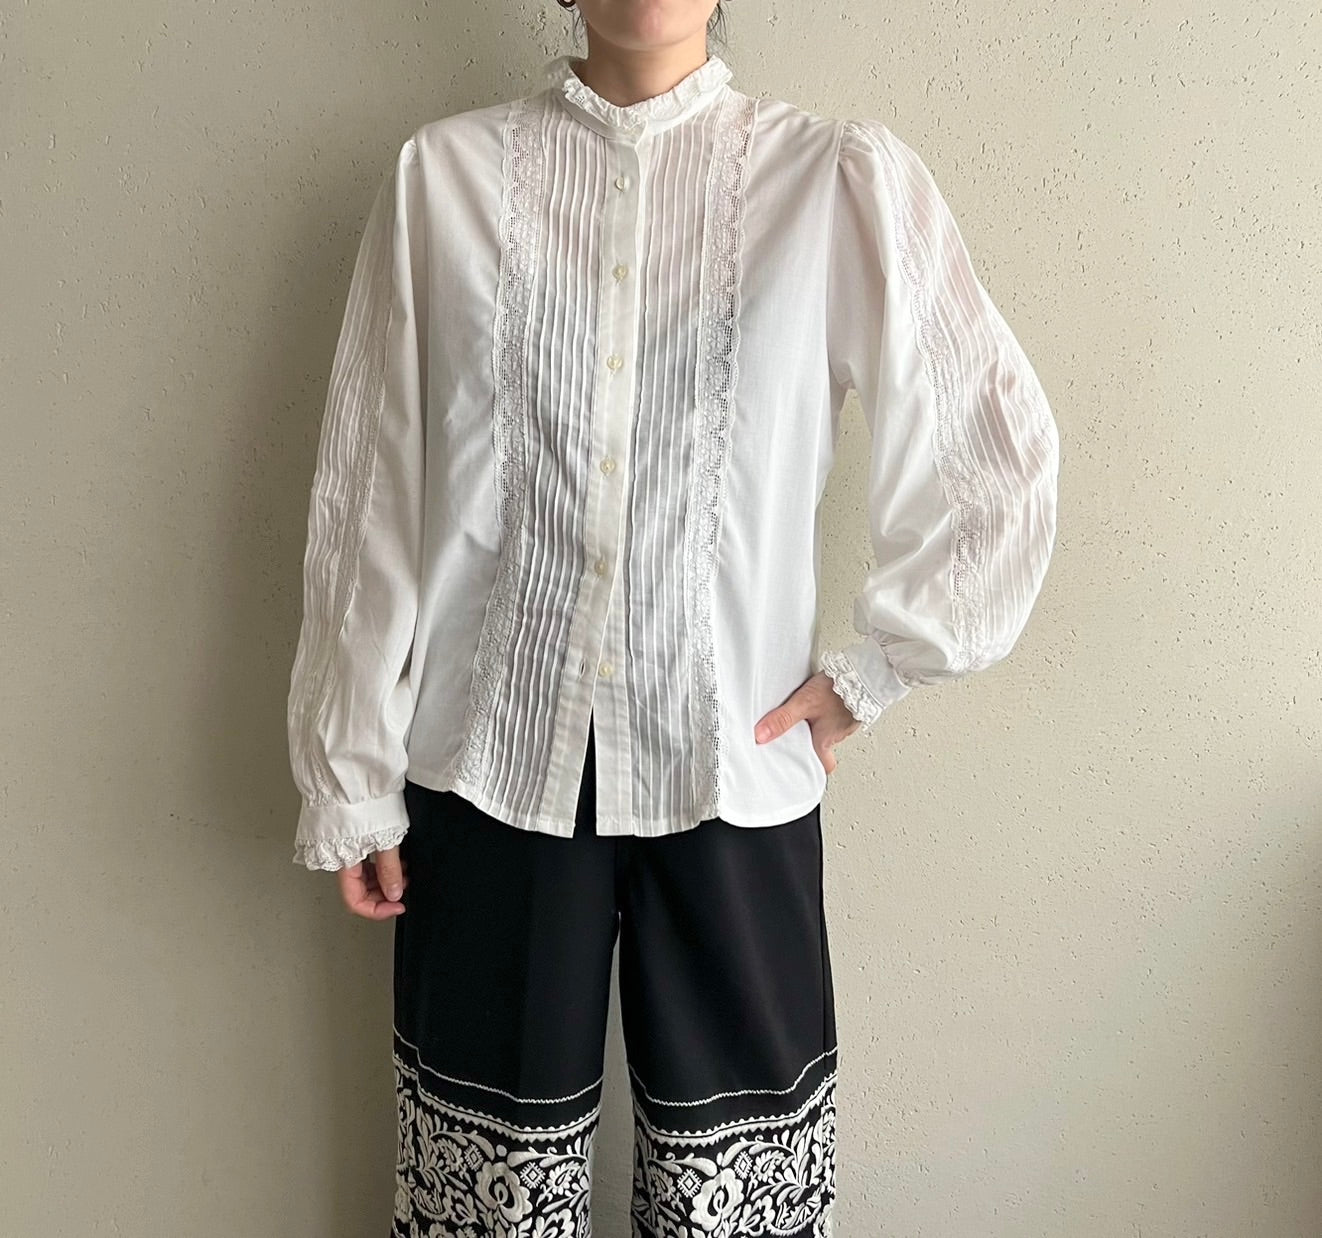 90s Lace Blouse Made in Austria